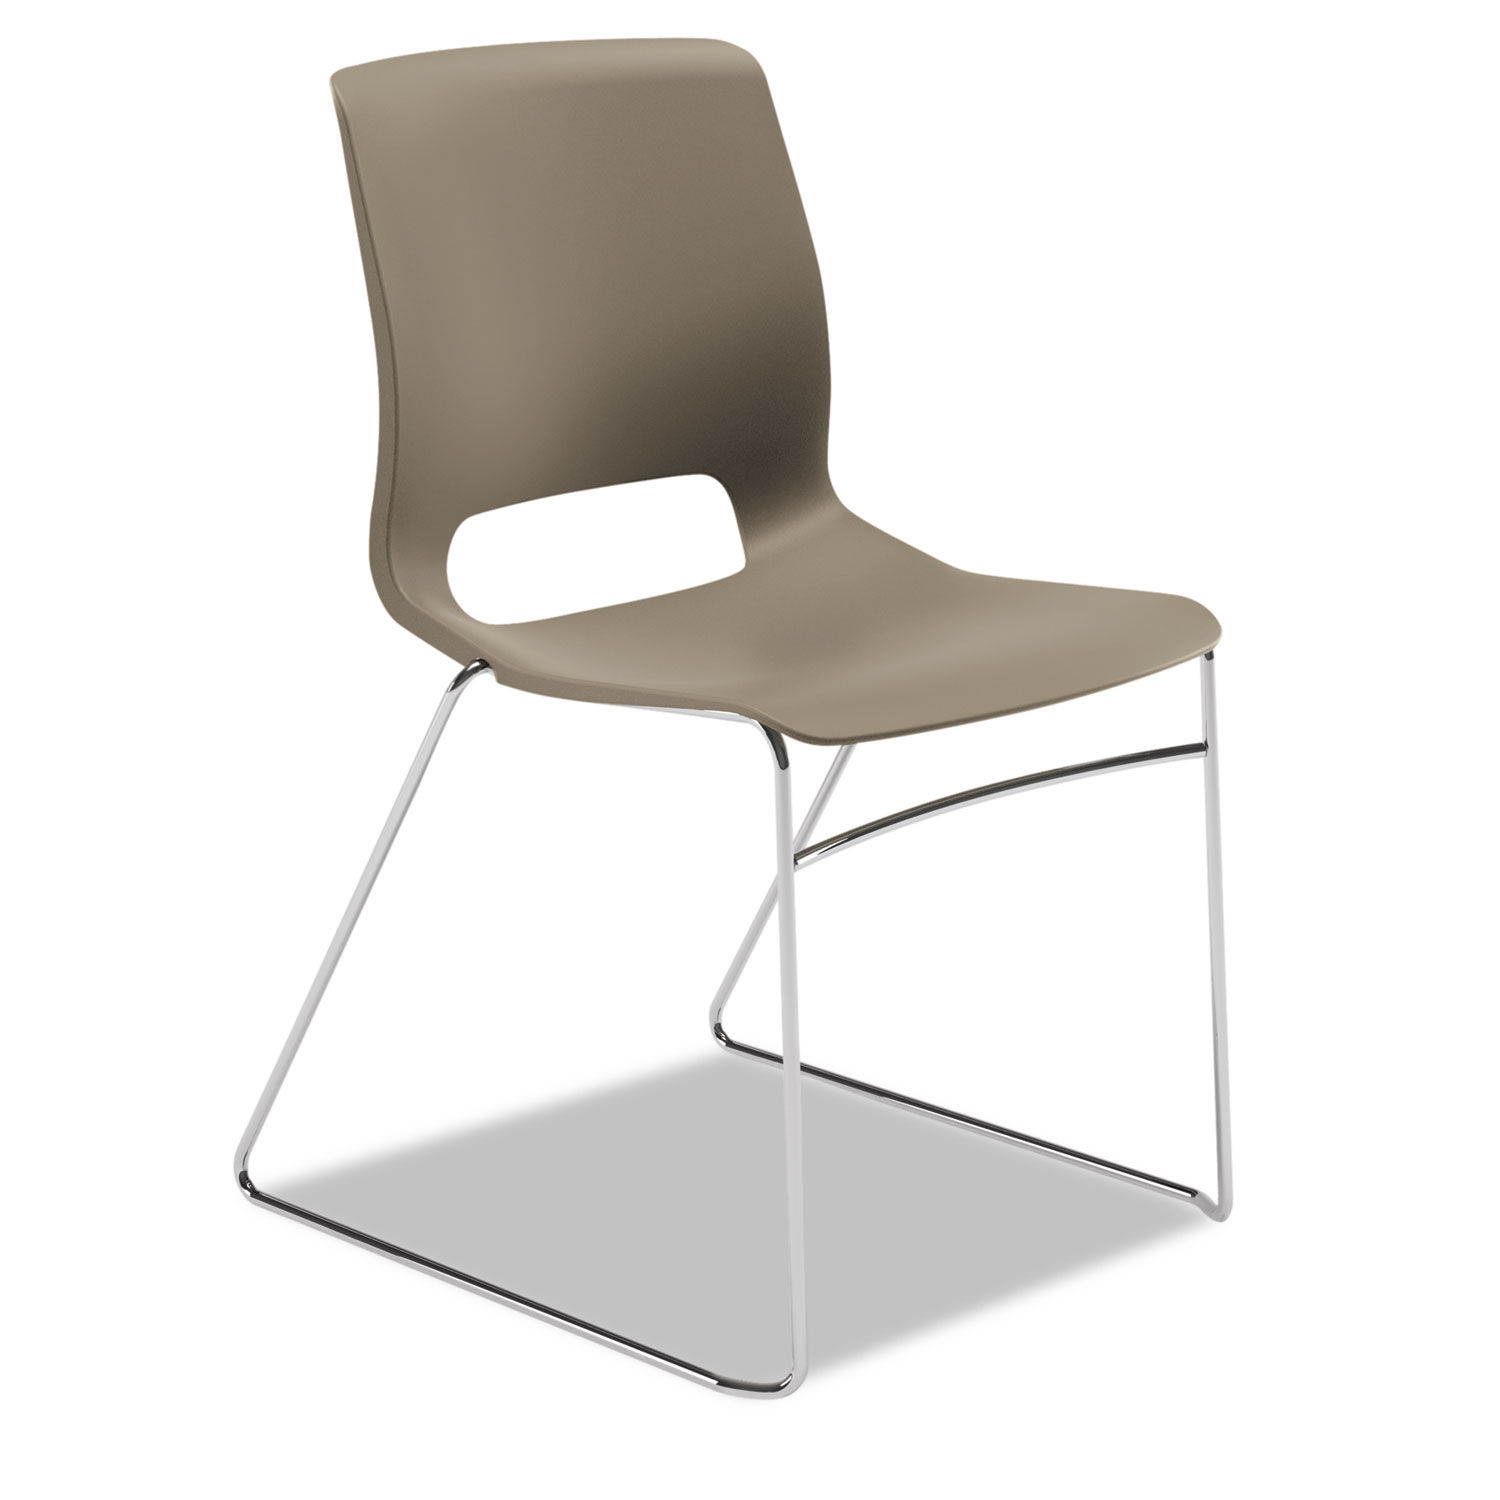 Motivate High-Density Stacking Chair Supports 300 lb, 17.75" Seat Height, Shadow Seat, Shadow Back, Chrome Base, 4/Carton